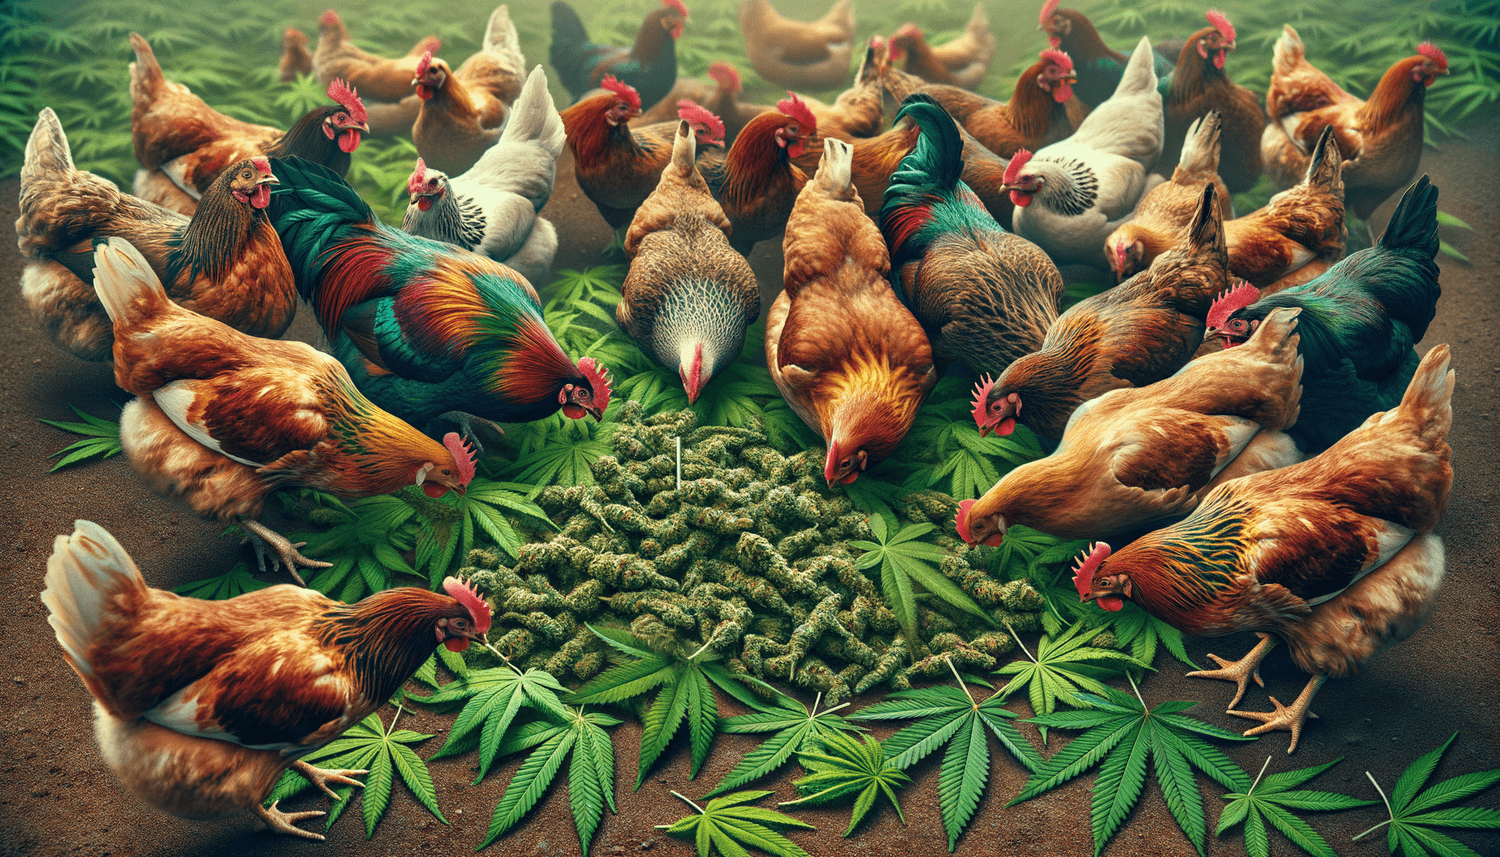 Can Chickens Eat Hemp Leaves?